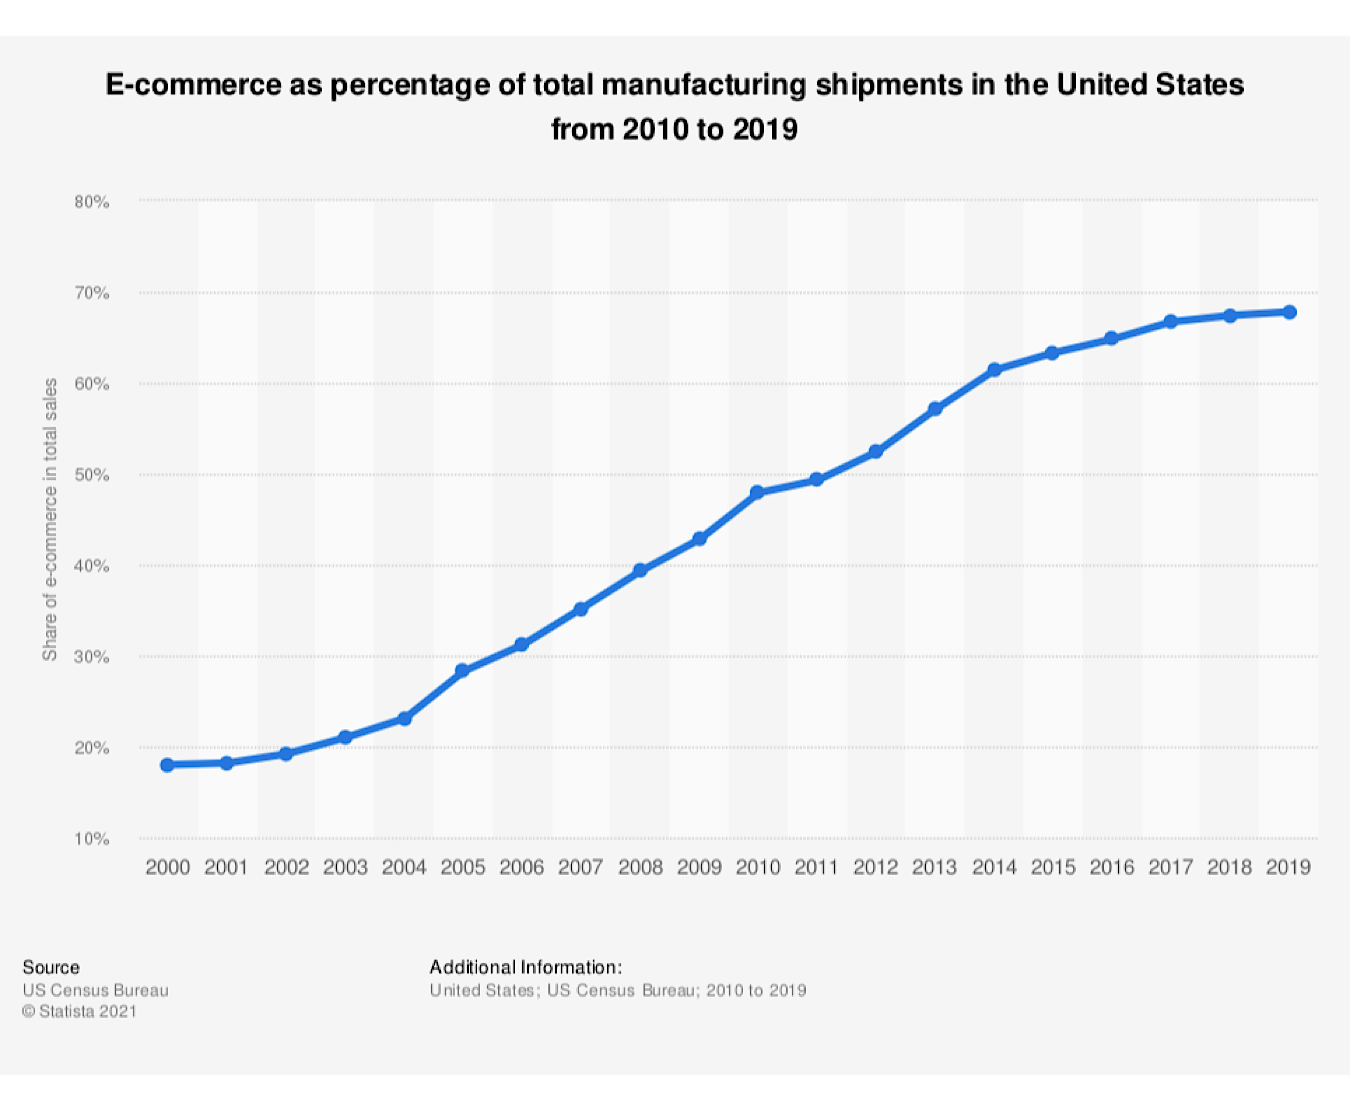 graph shows the steady rise in e-commerce as a percentage of total manufacturing shipments in the U.S. an important consideration when choosing a manufacturing marketing partner